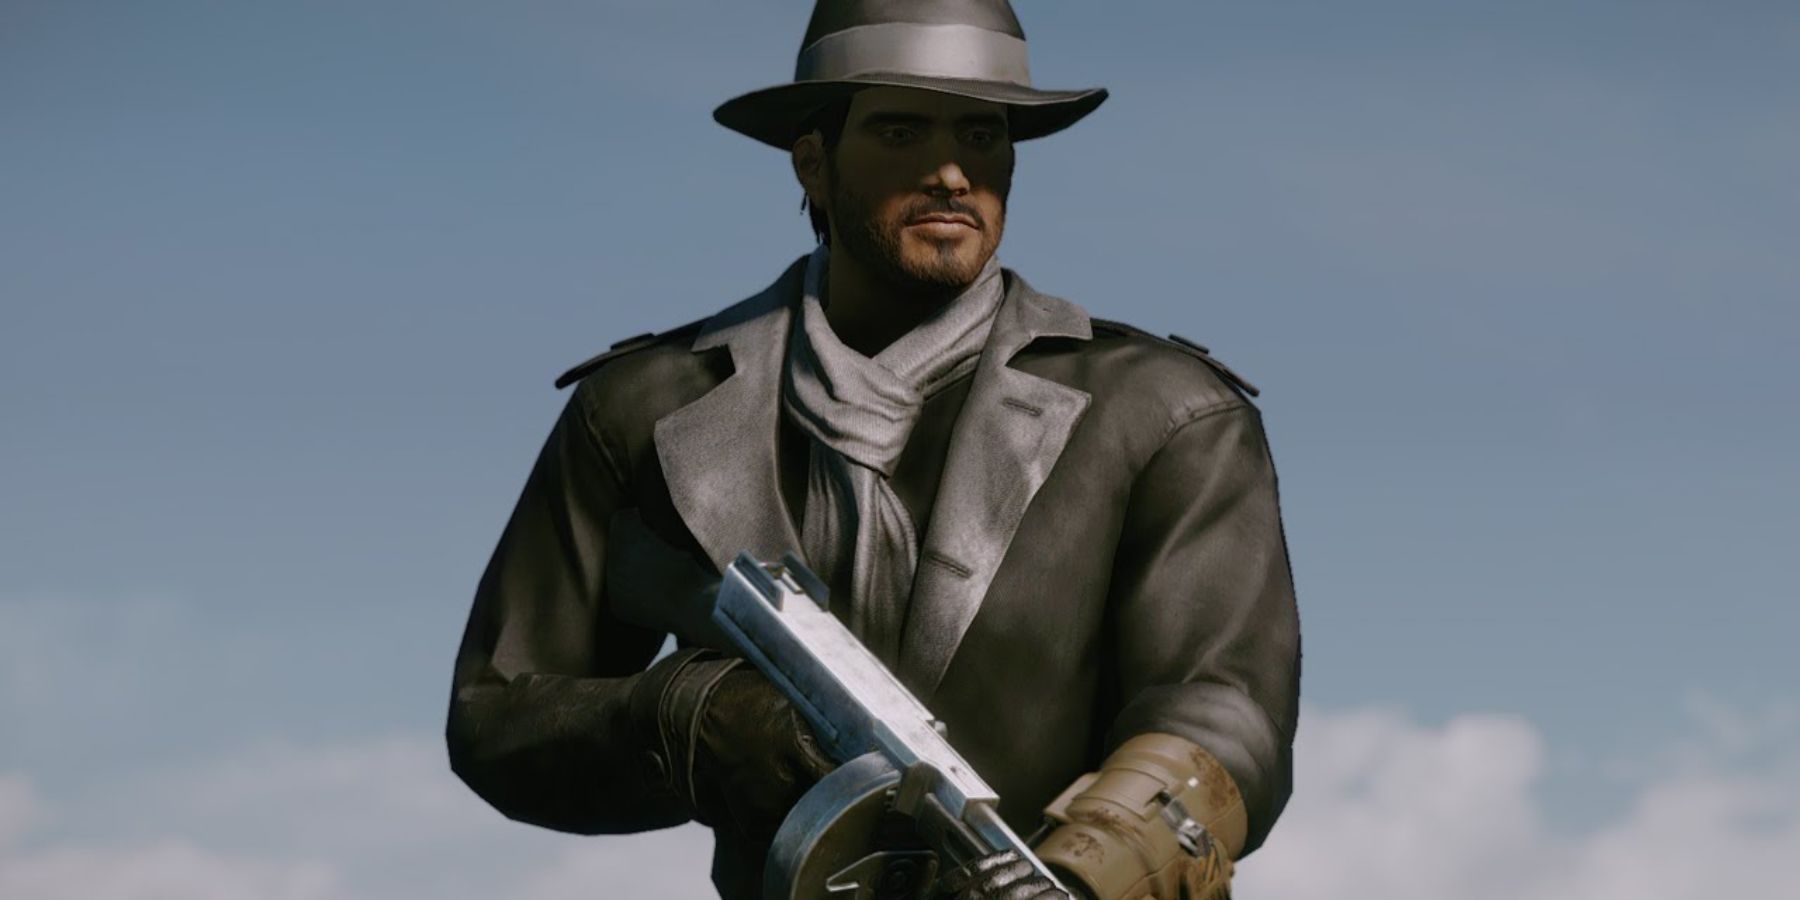 The player donning the Silver Shroud costume and weapon